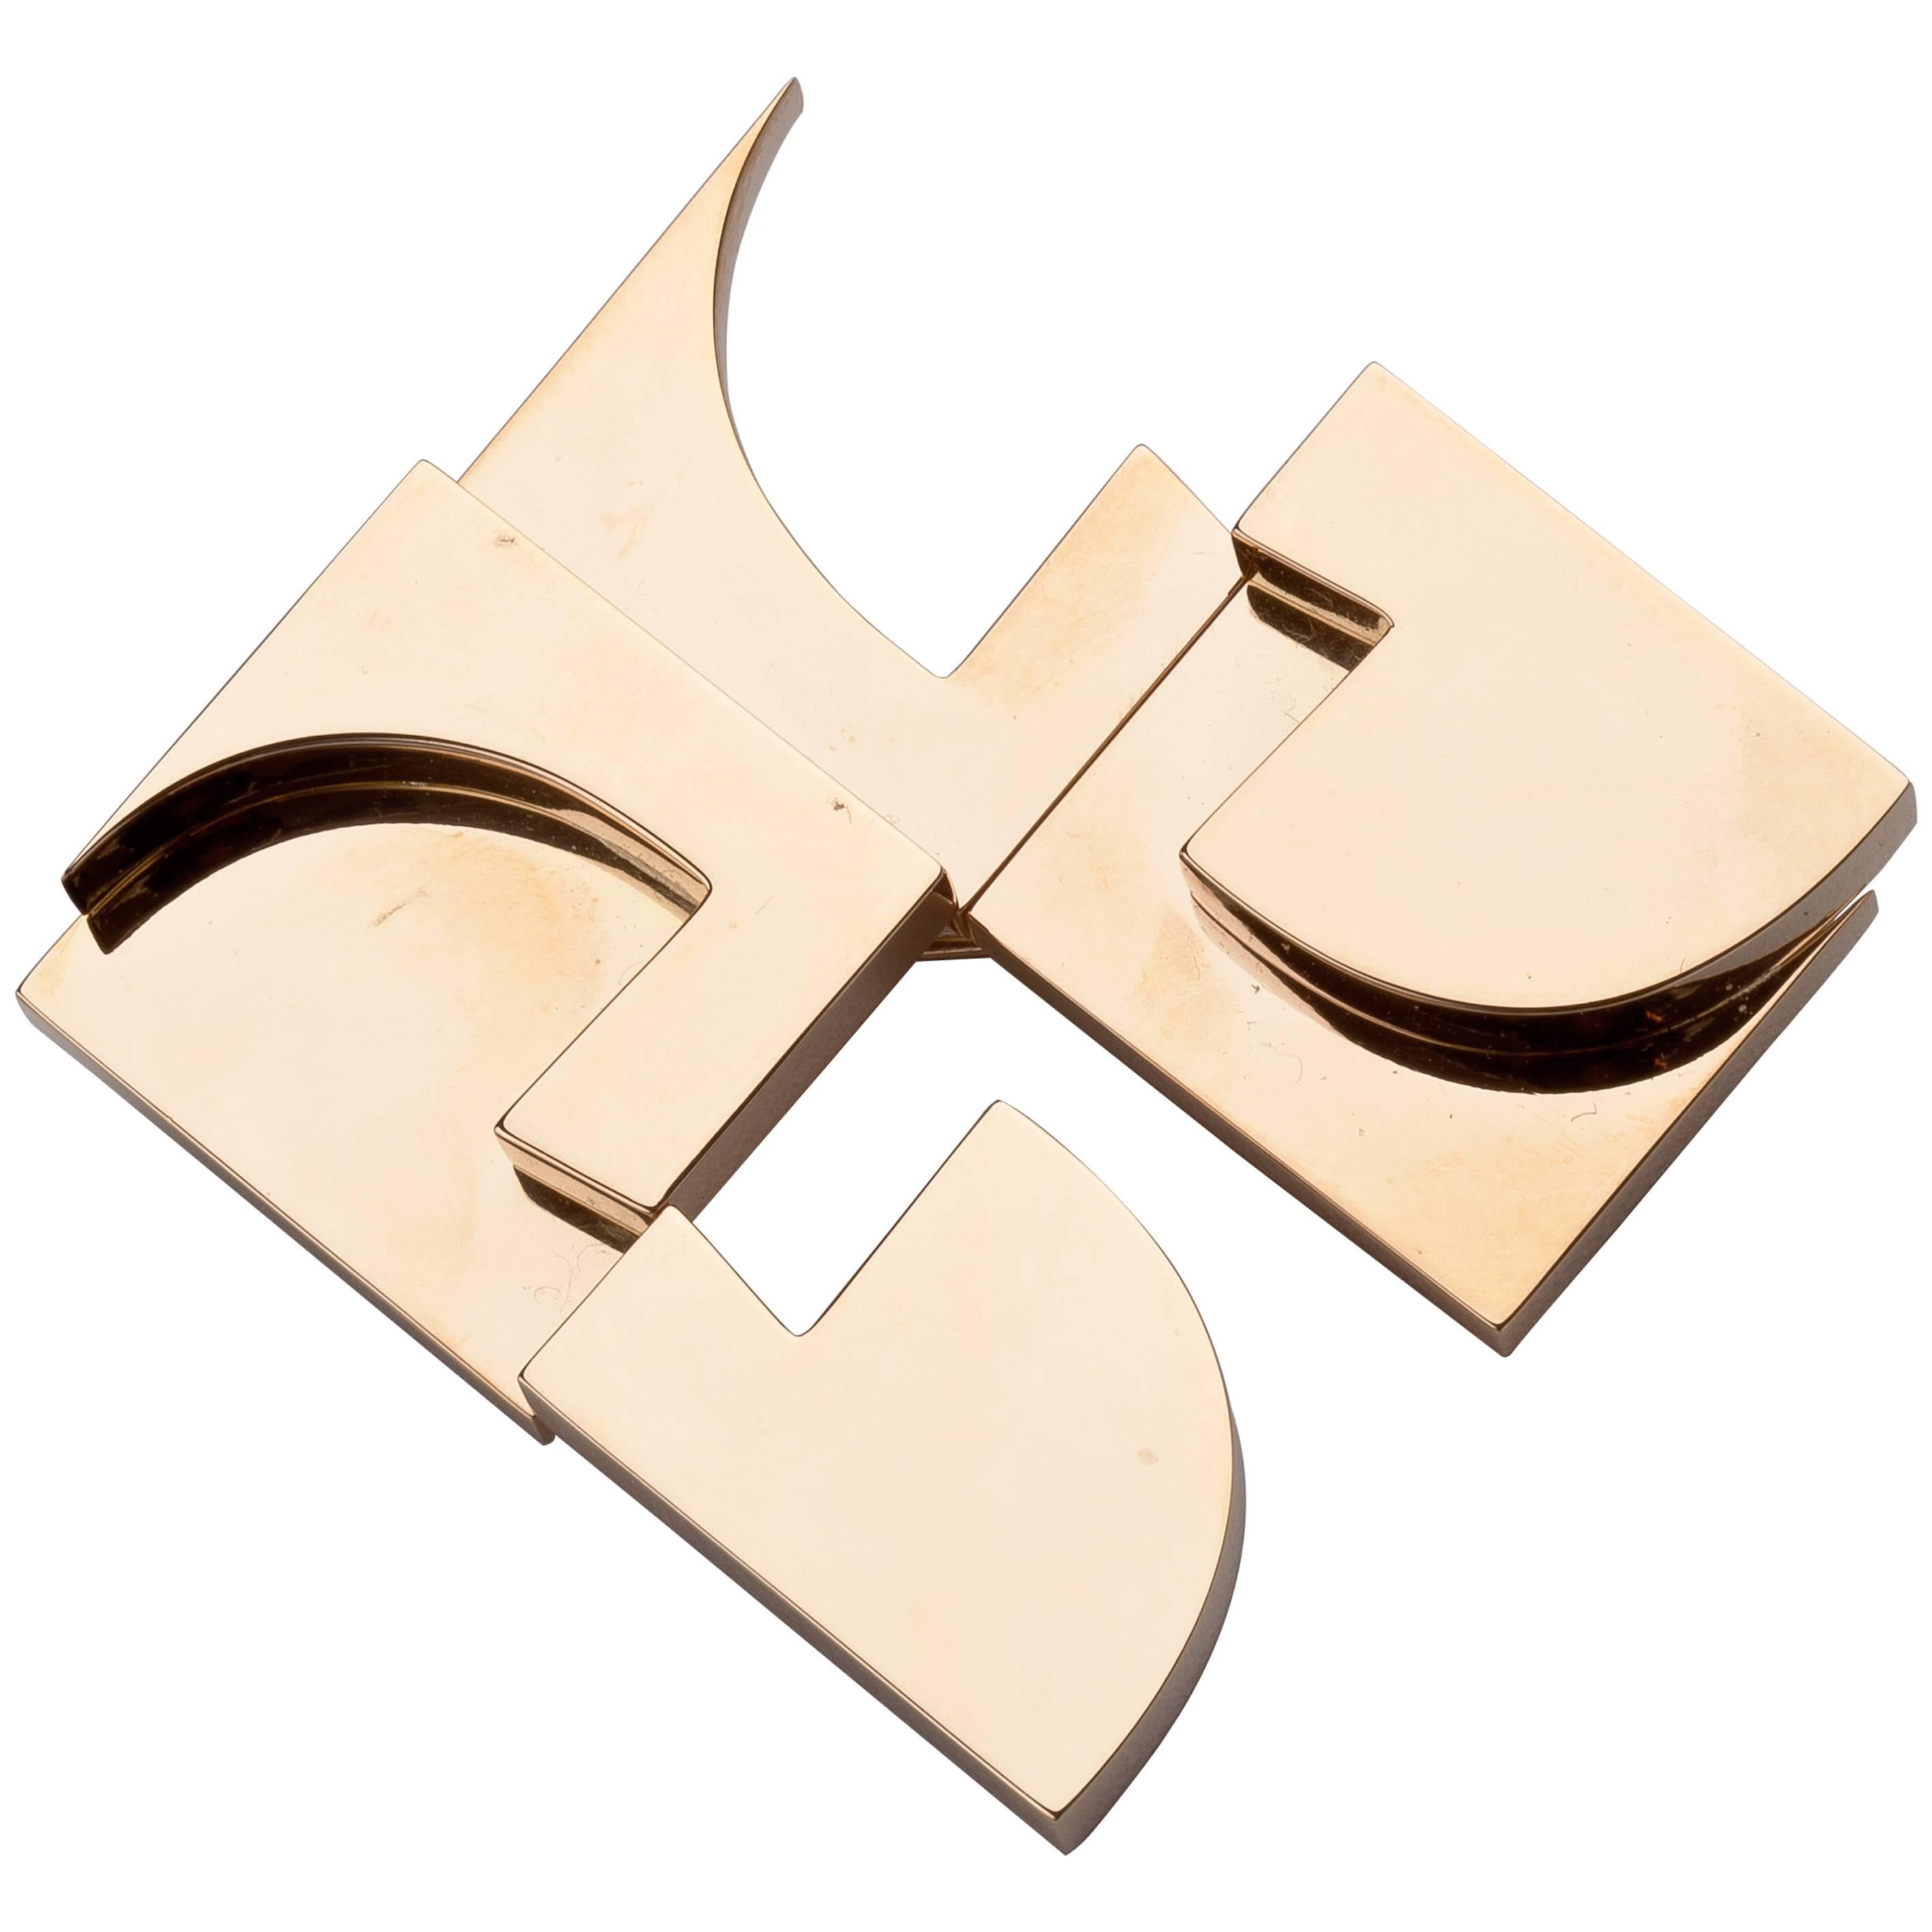 1971 Hans Richter Abstract Gold Pendant Brooch For Sale